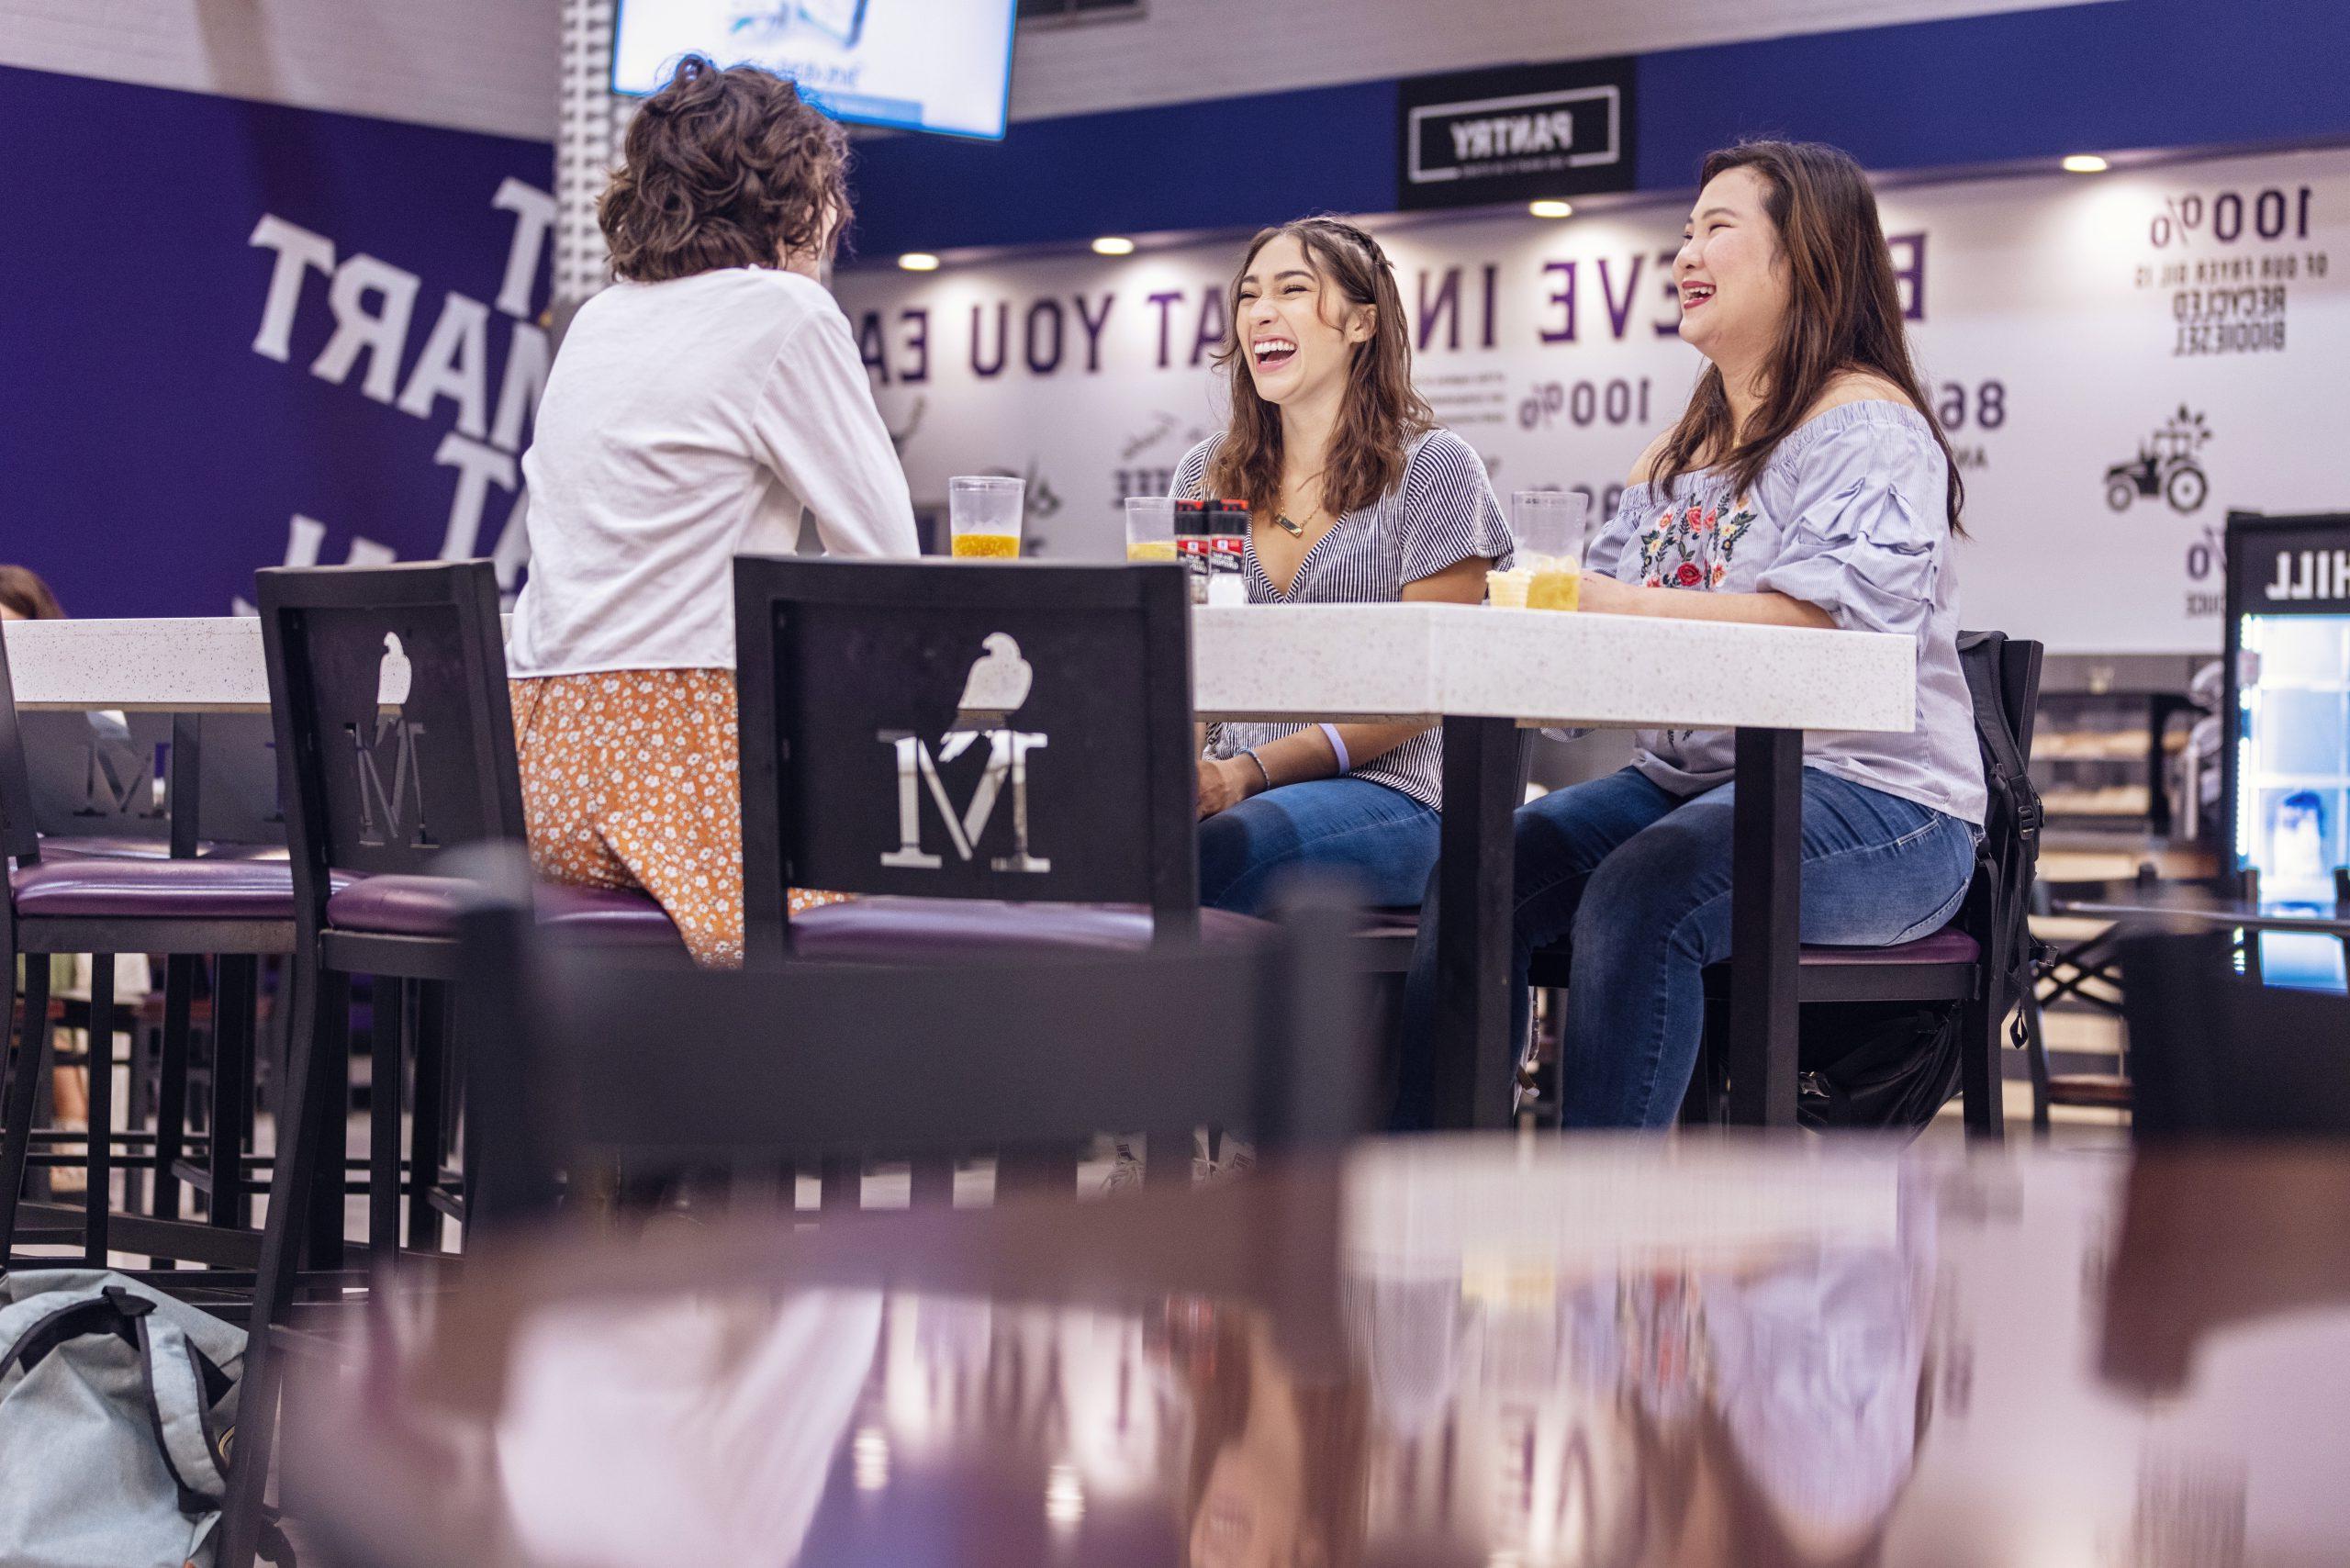 University of Montevallo students smile as they chat while sitting at a table in Anna Irvin Hall.